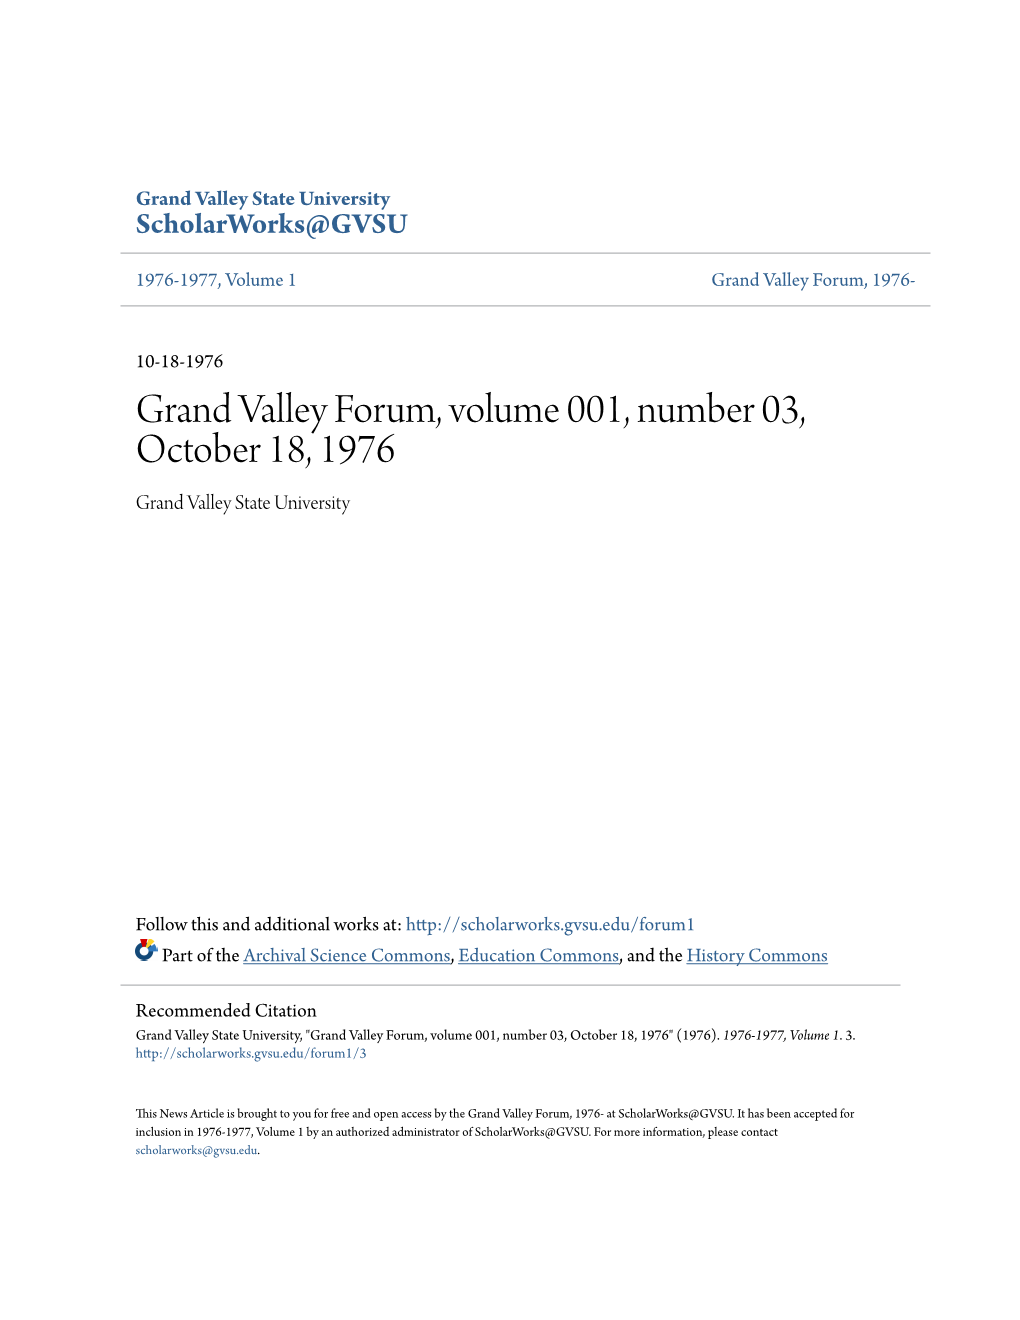 Grand Valley Forum, Volume 001, Number 03, October 18, 1976 Grand Valley State University